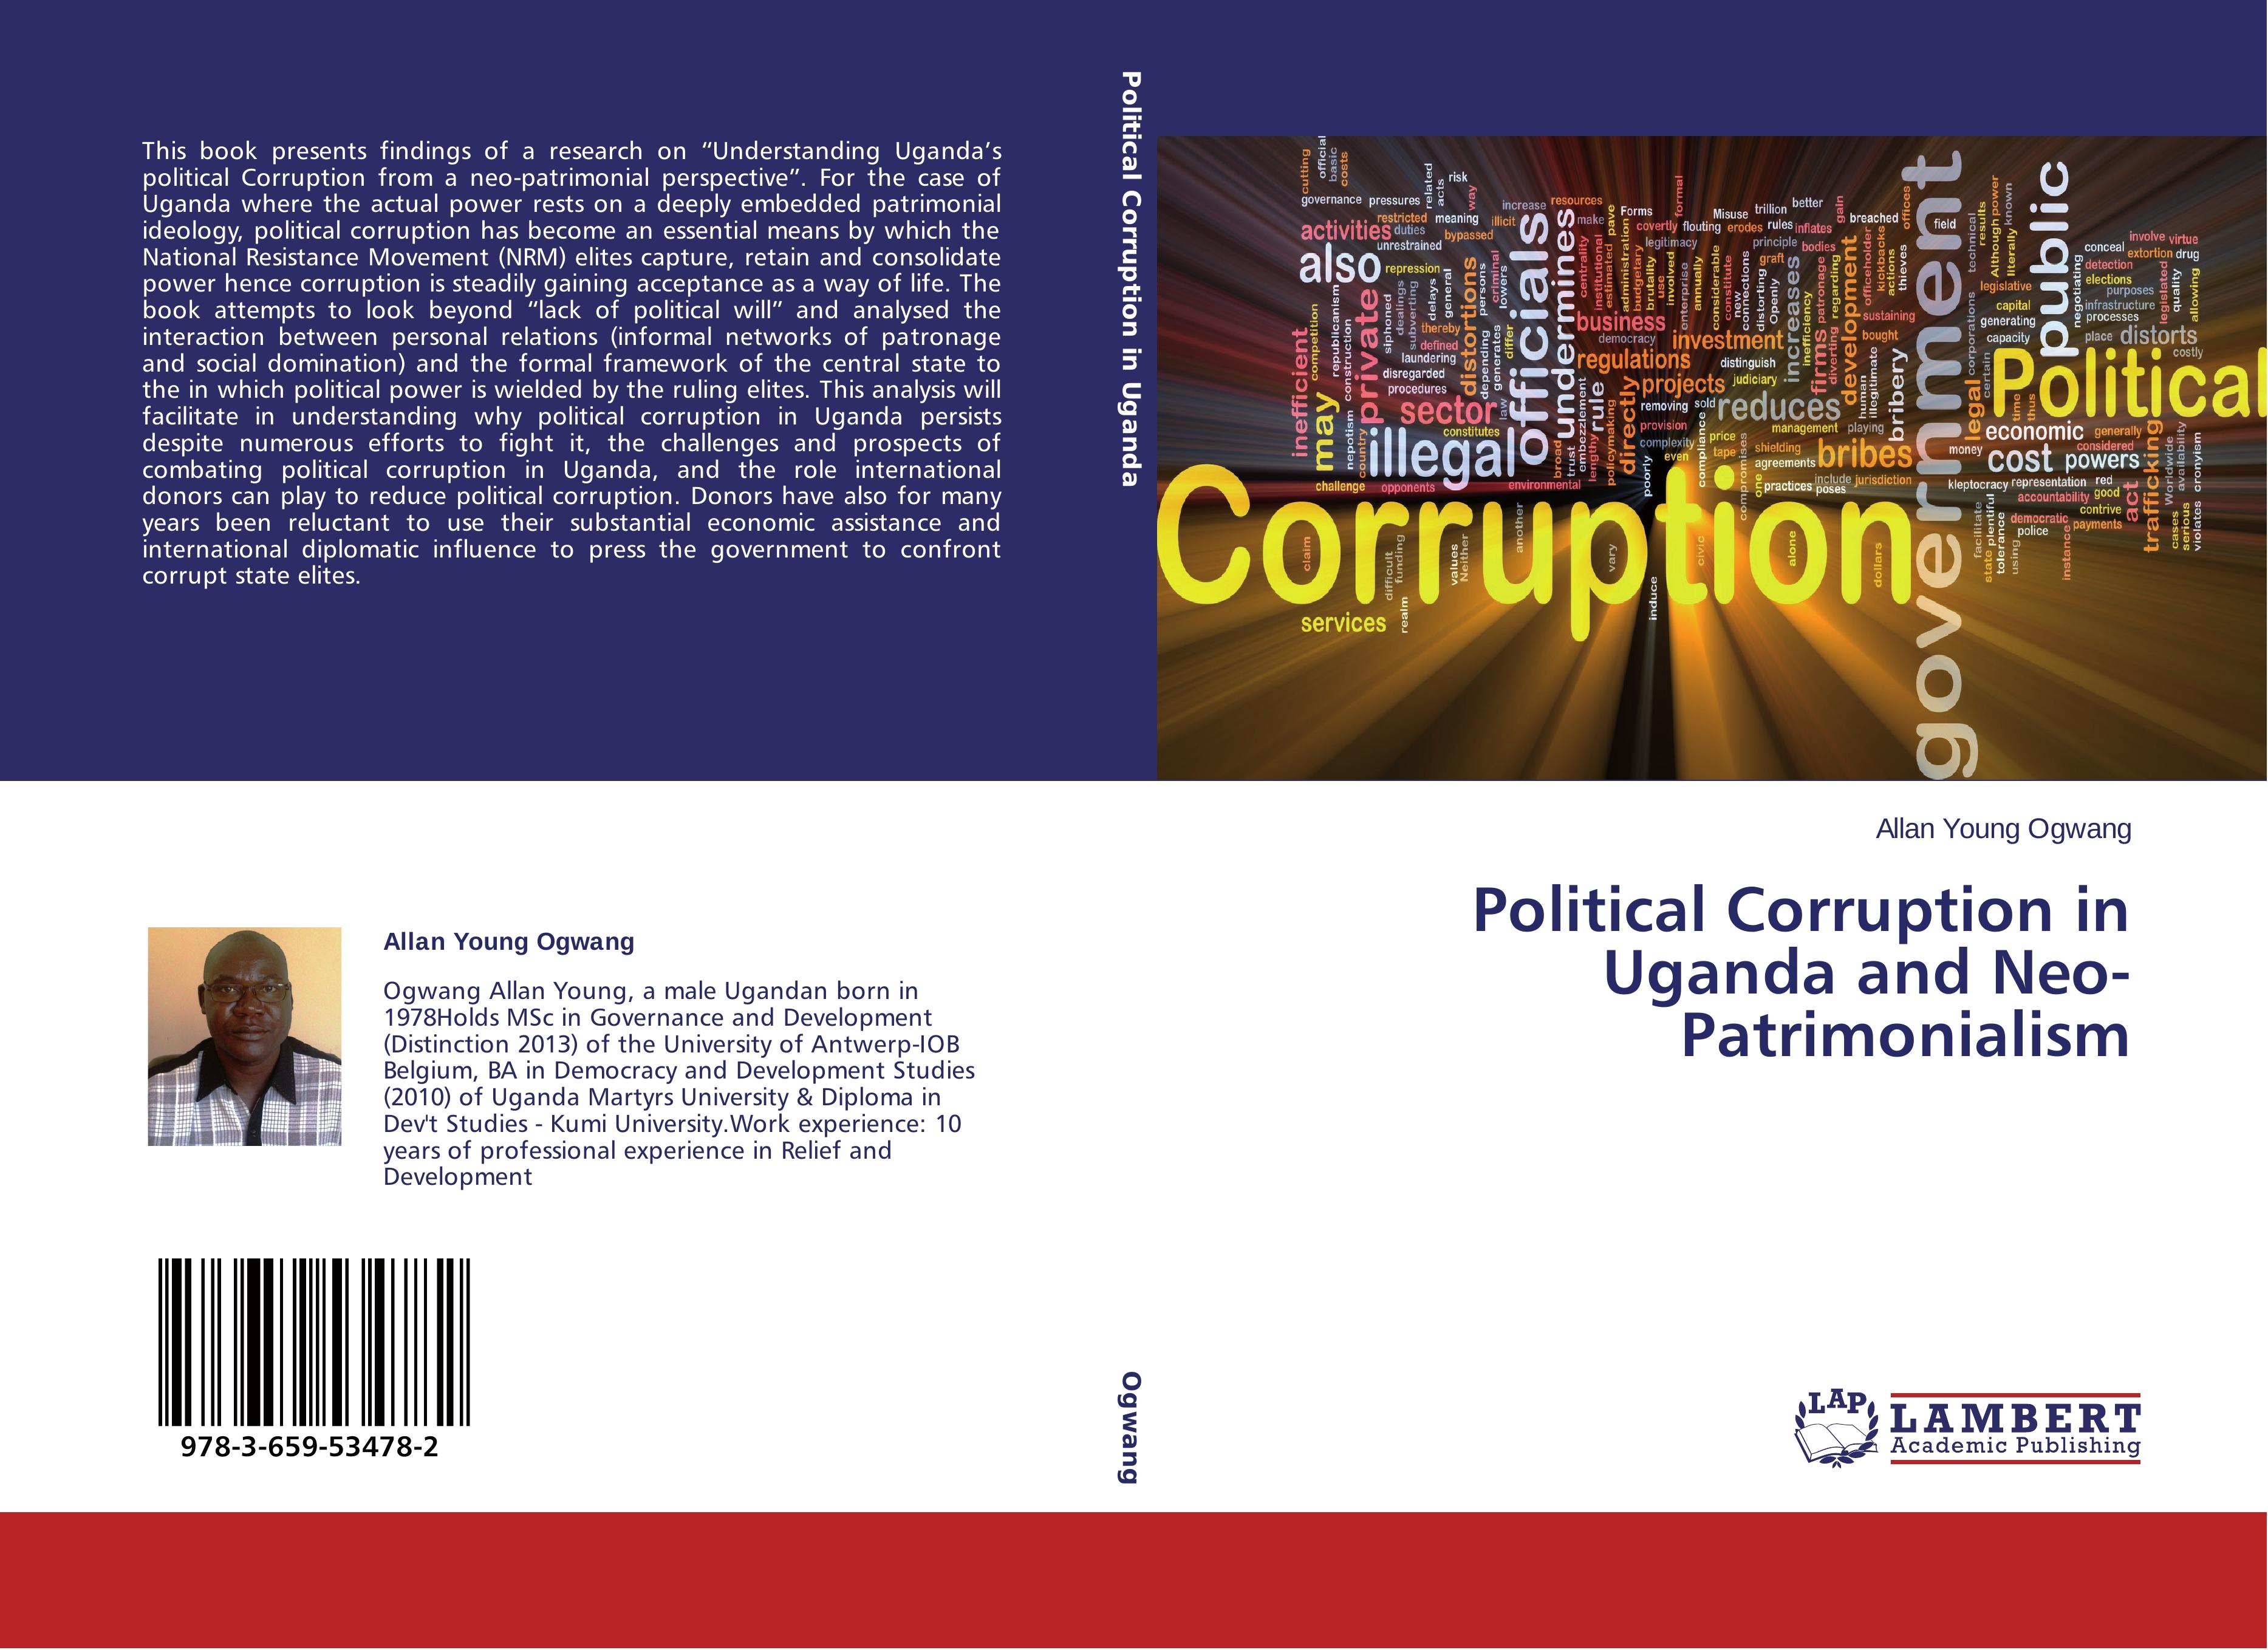 Political Corruption in Uganda and Neo-Patrimonialism - Allan Young Ogwang